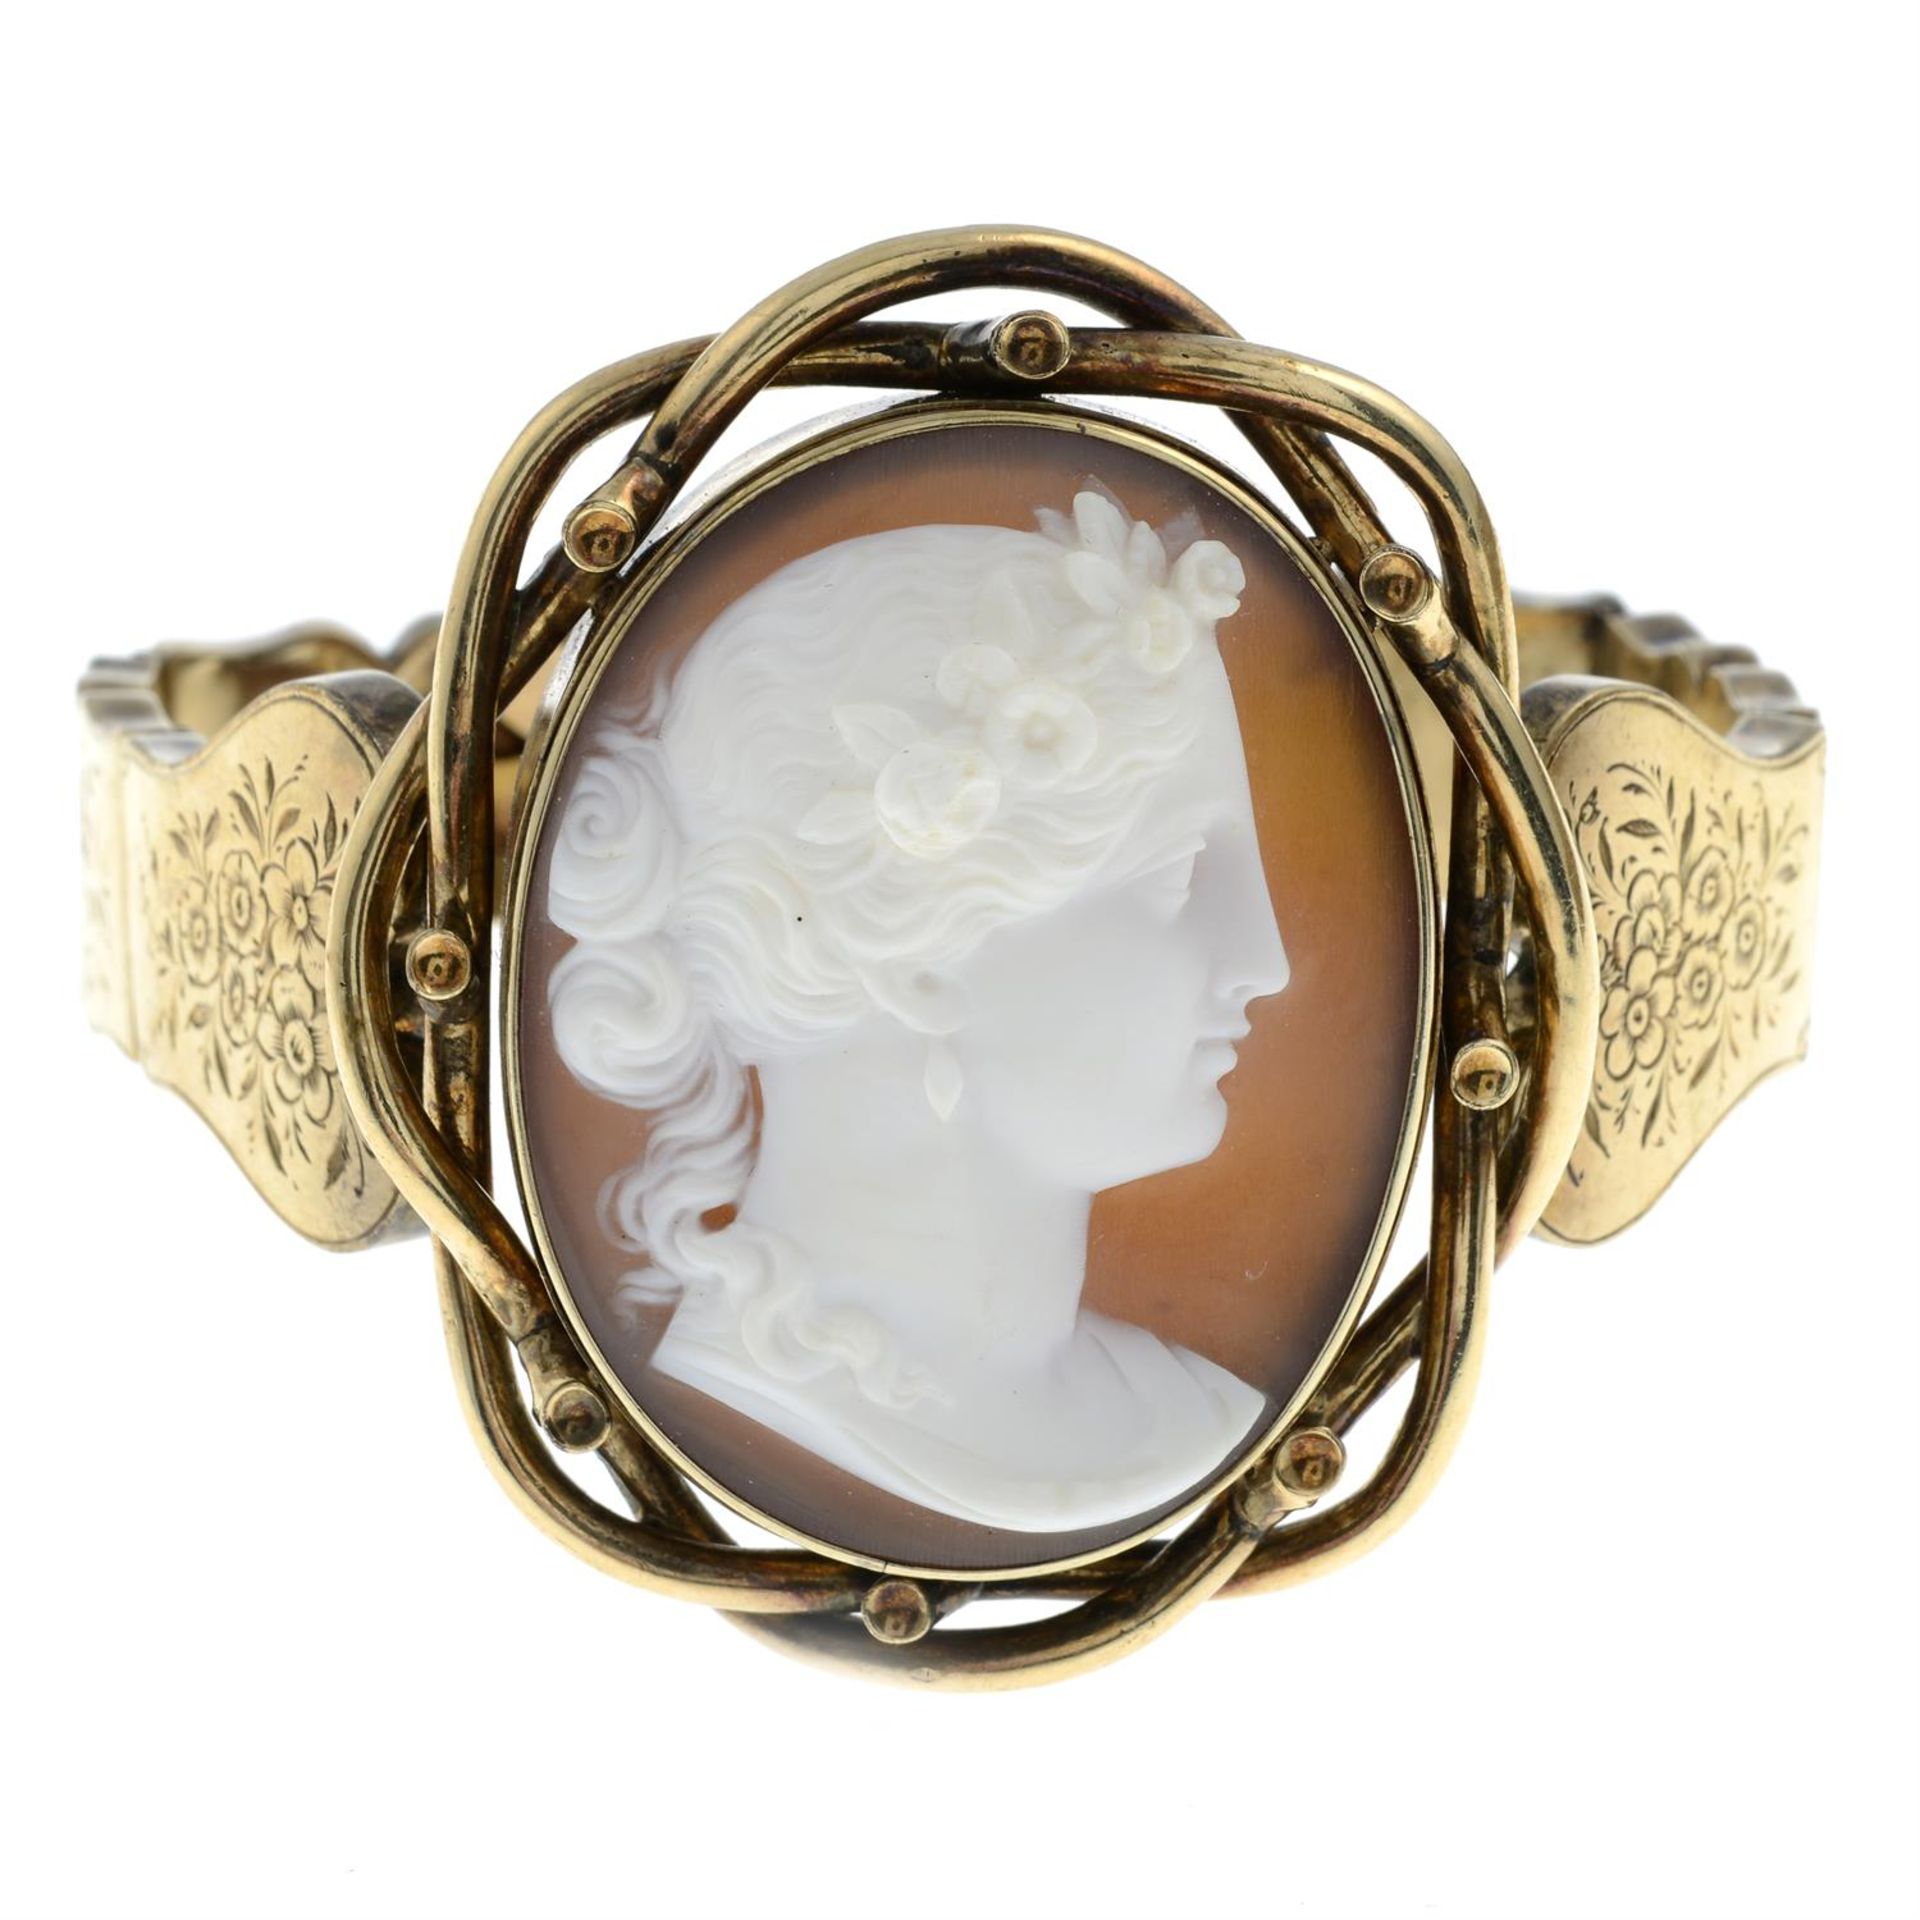 A late 19th century gold shell cameo bracelet, depicting Flora, with floral engraved sides. - Image 2 of 3